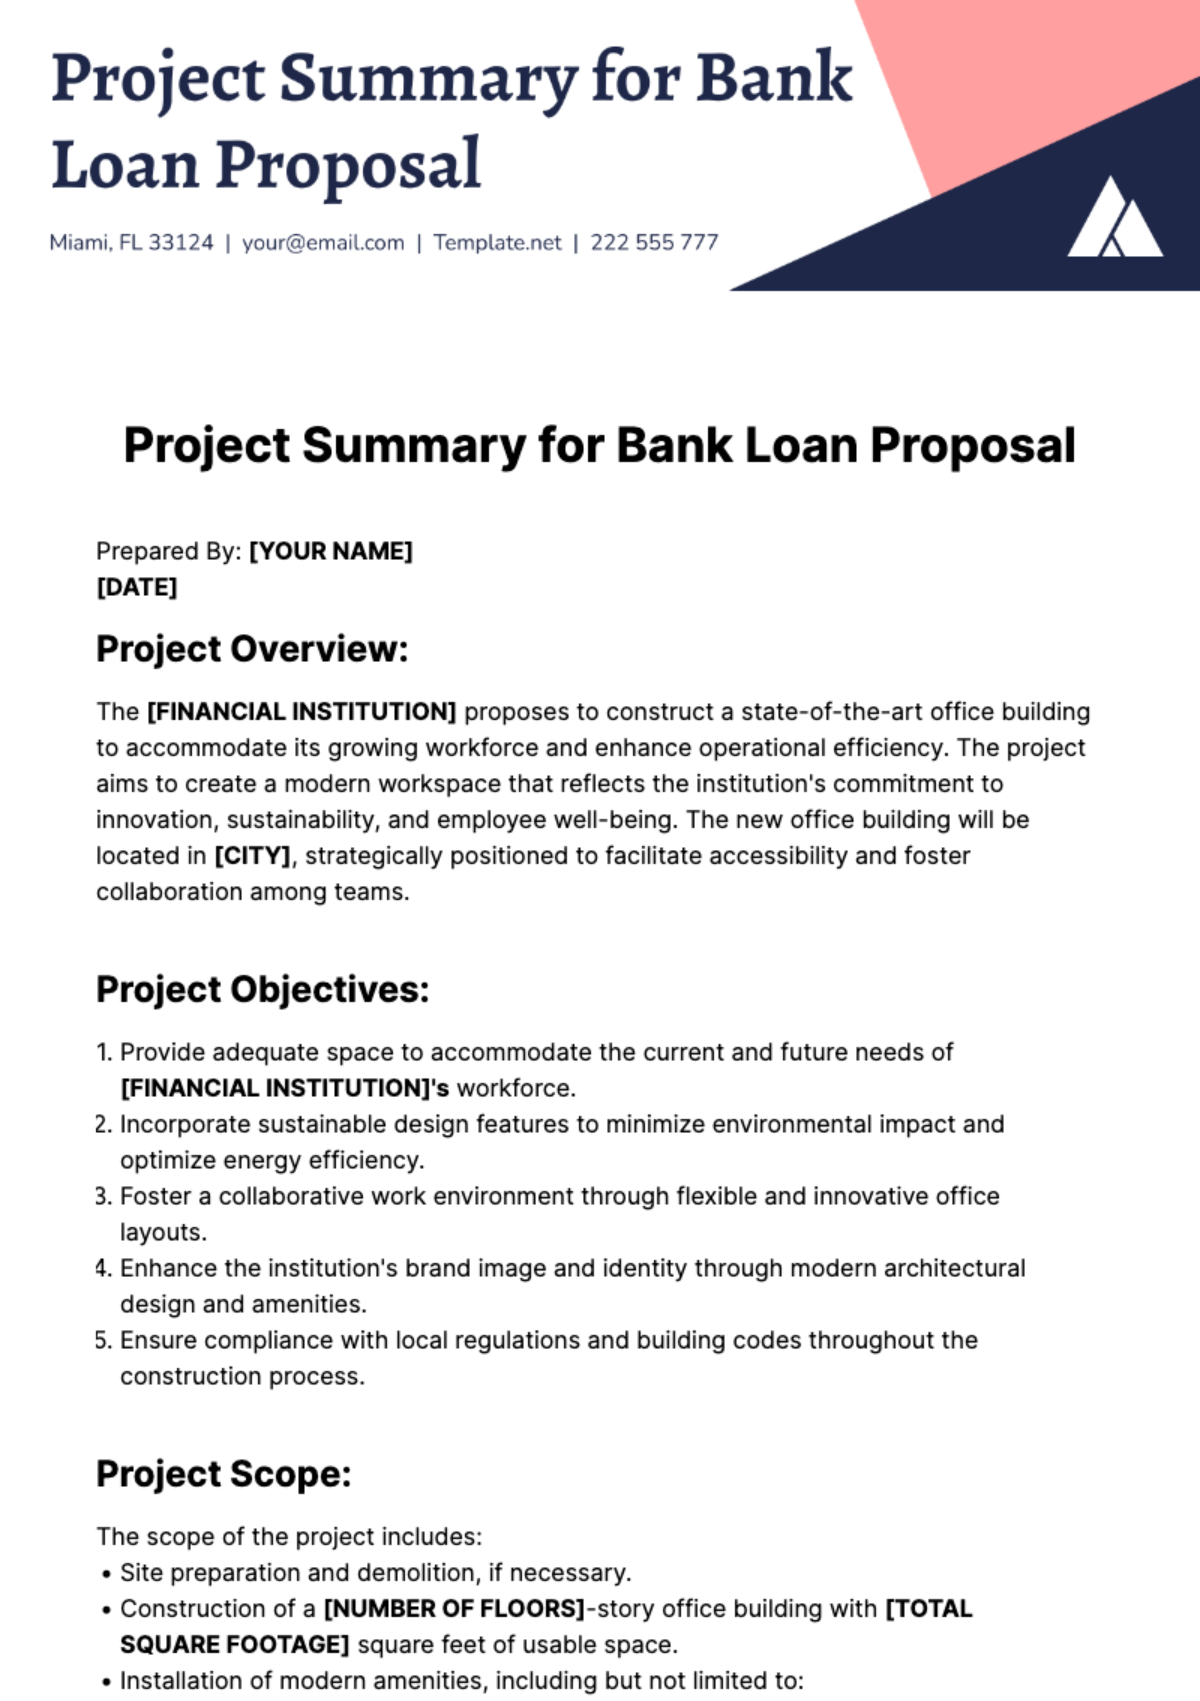 Project Summary for Bank Loan Proposal Template